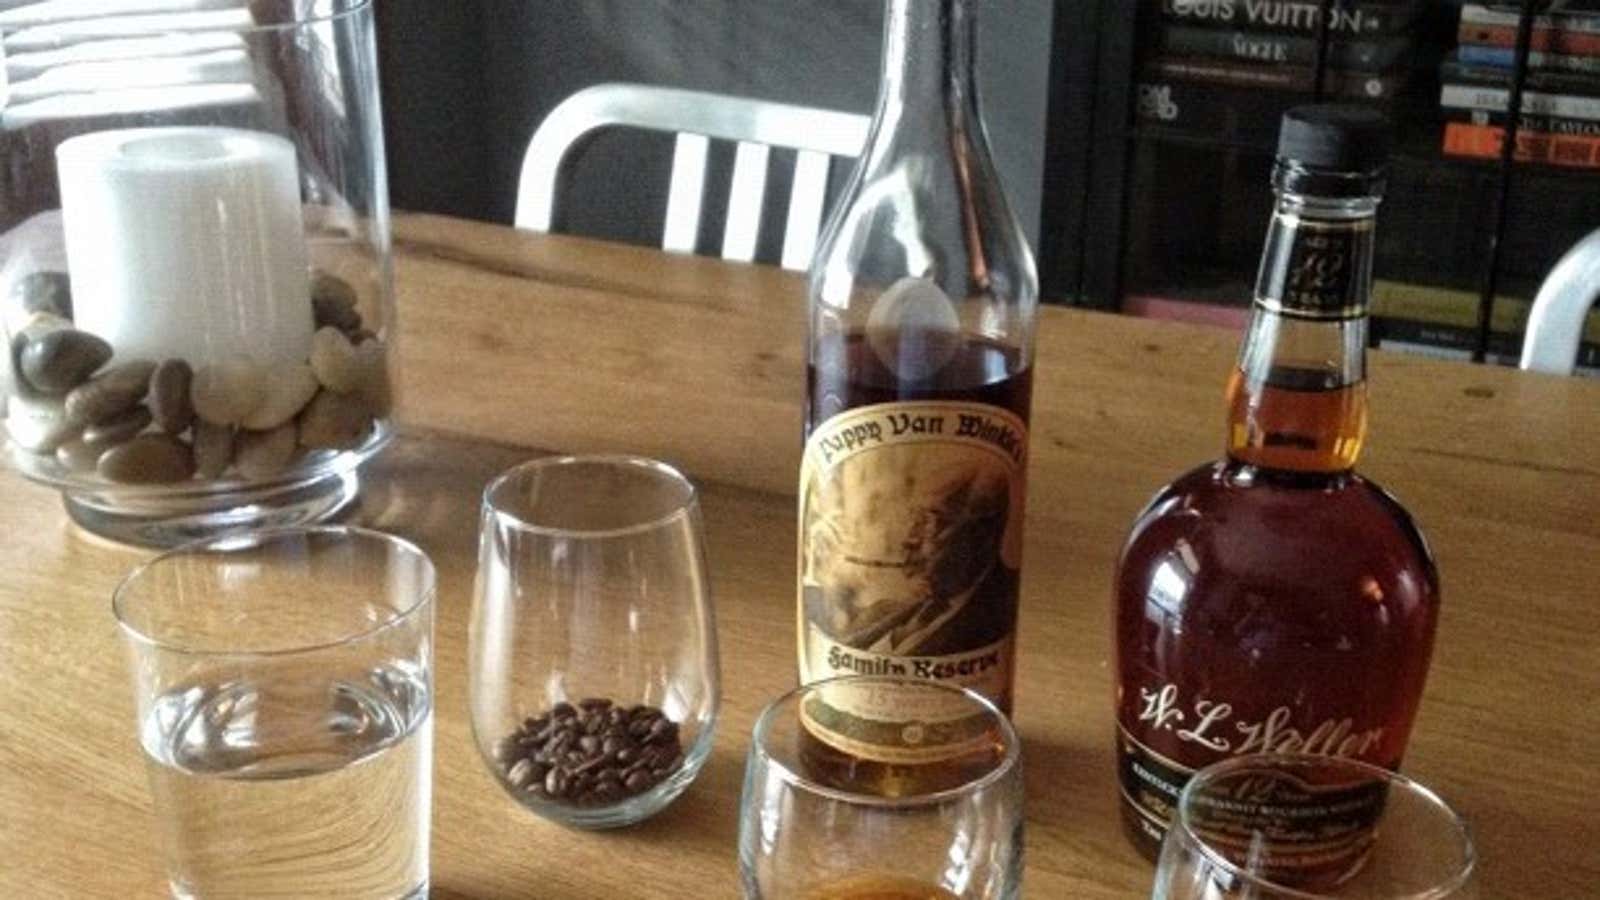 It’s not the Pappy Van Winkle, though that may work, too…